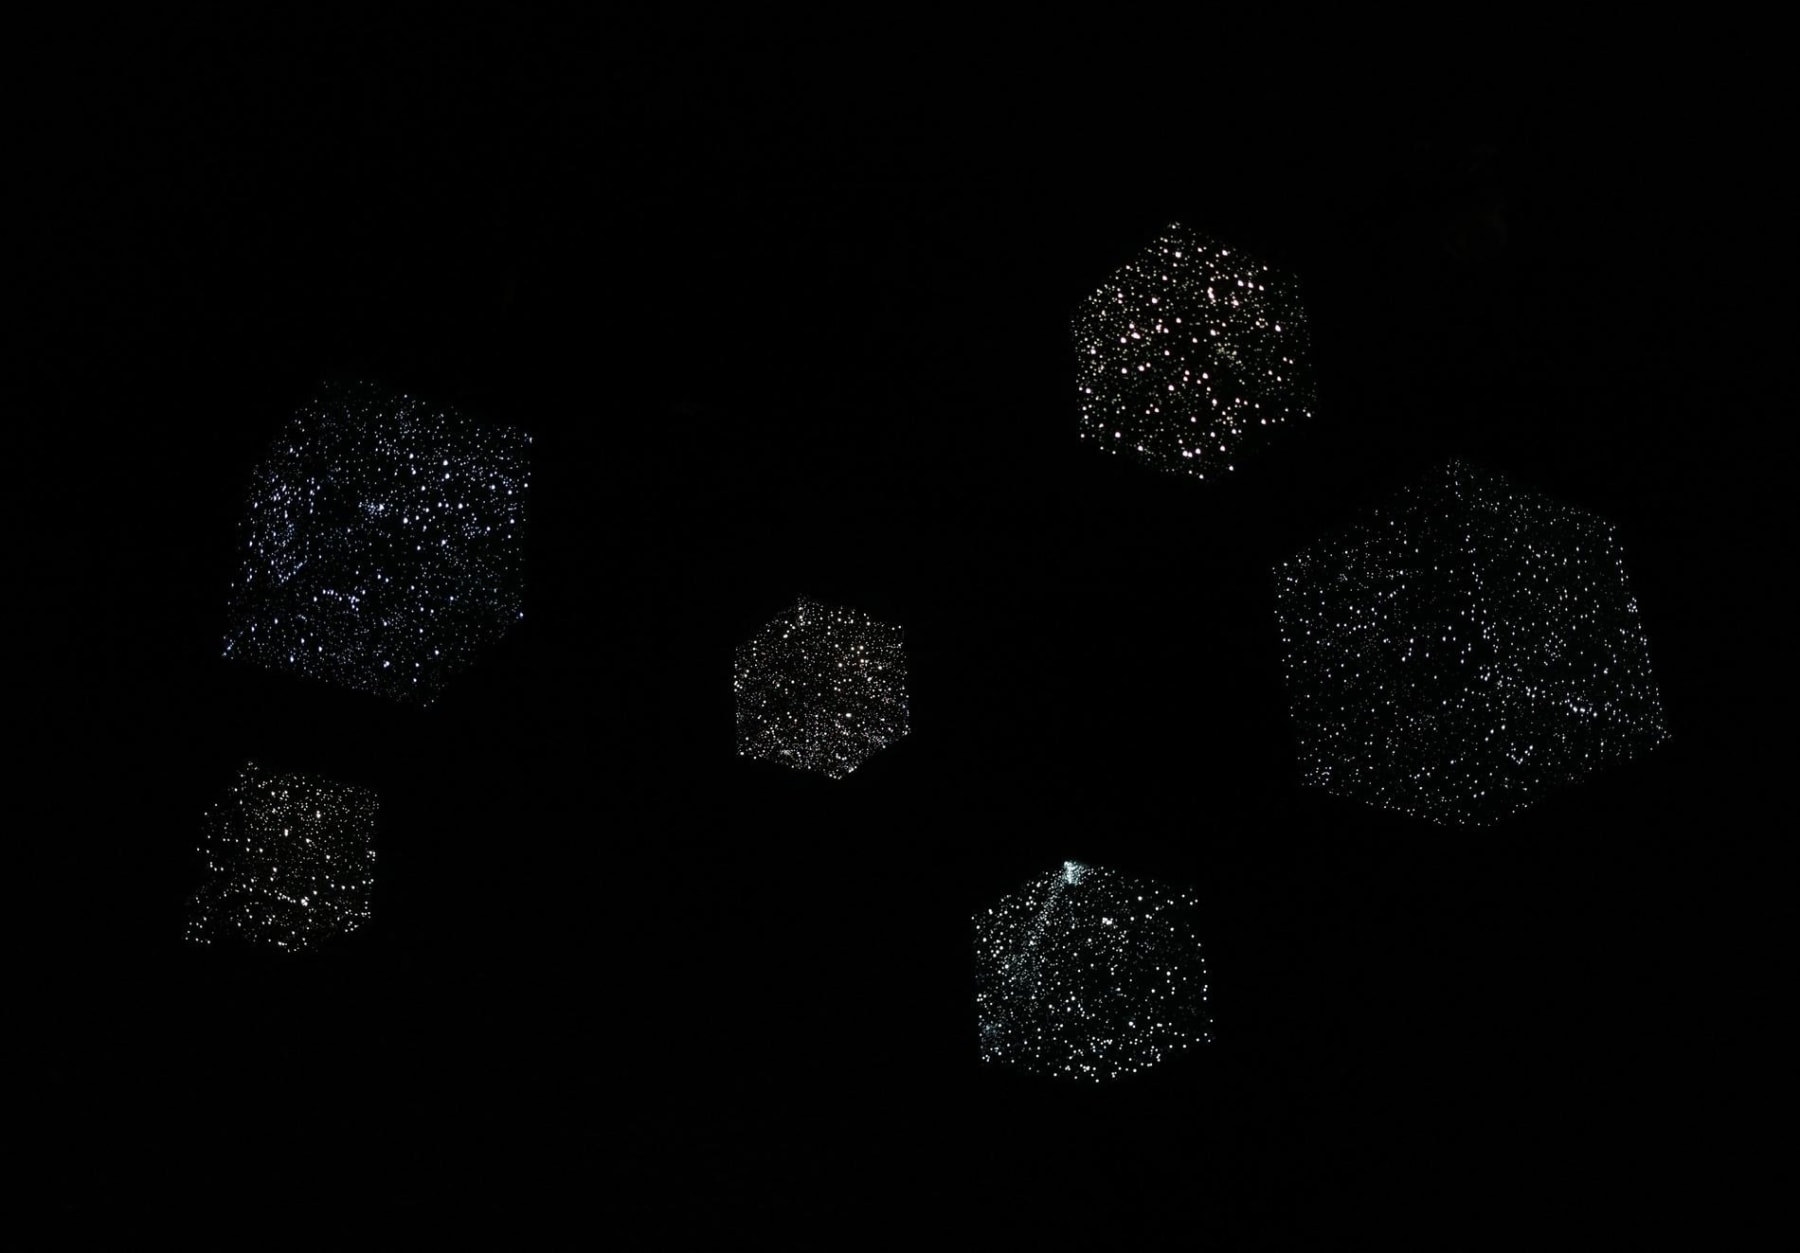 Image of FRED TOMASELLI's Cubic Sky, 1988